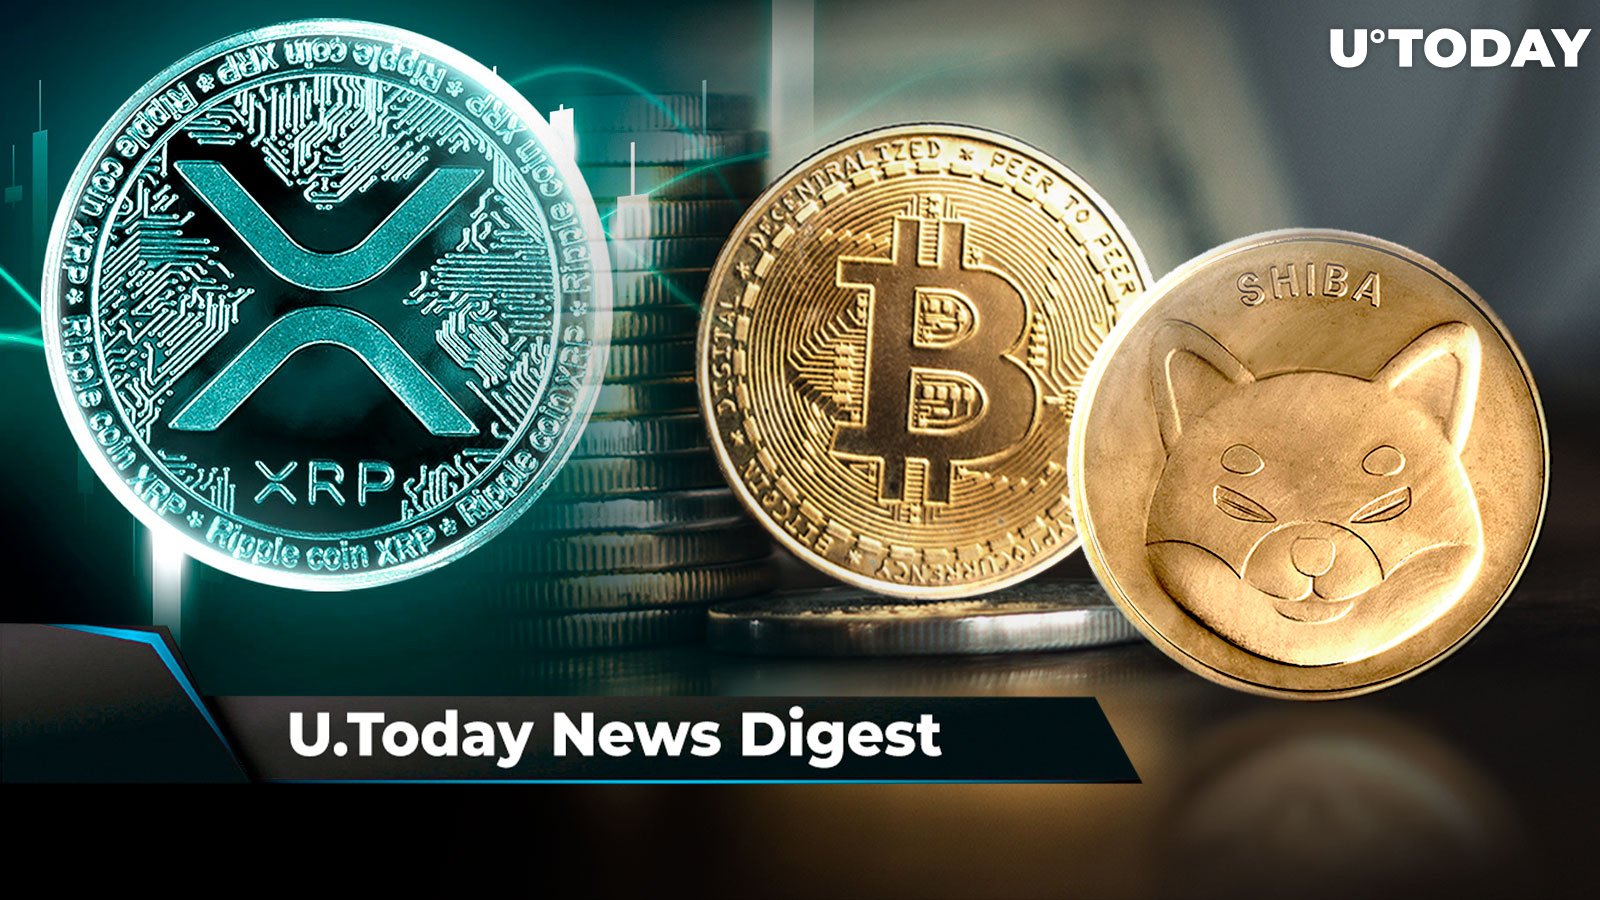 XRP Spikes 80% in Volume Amid Crypto Bloodbath, 461 Billion SHIB Moved to Robinhood Address, 17,000 BTC Exit Coinbase in Week's Second Largest Outflow: Crypto News Digest by U.Today